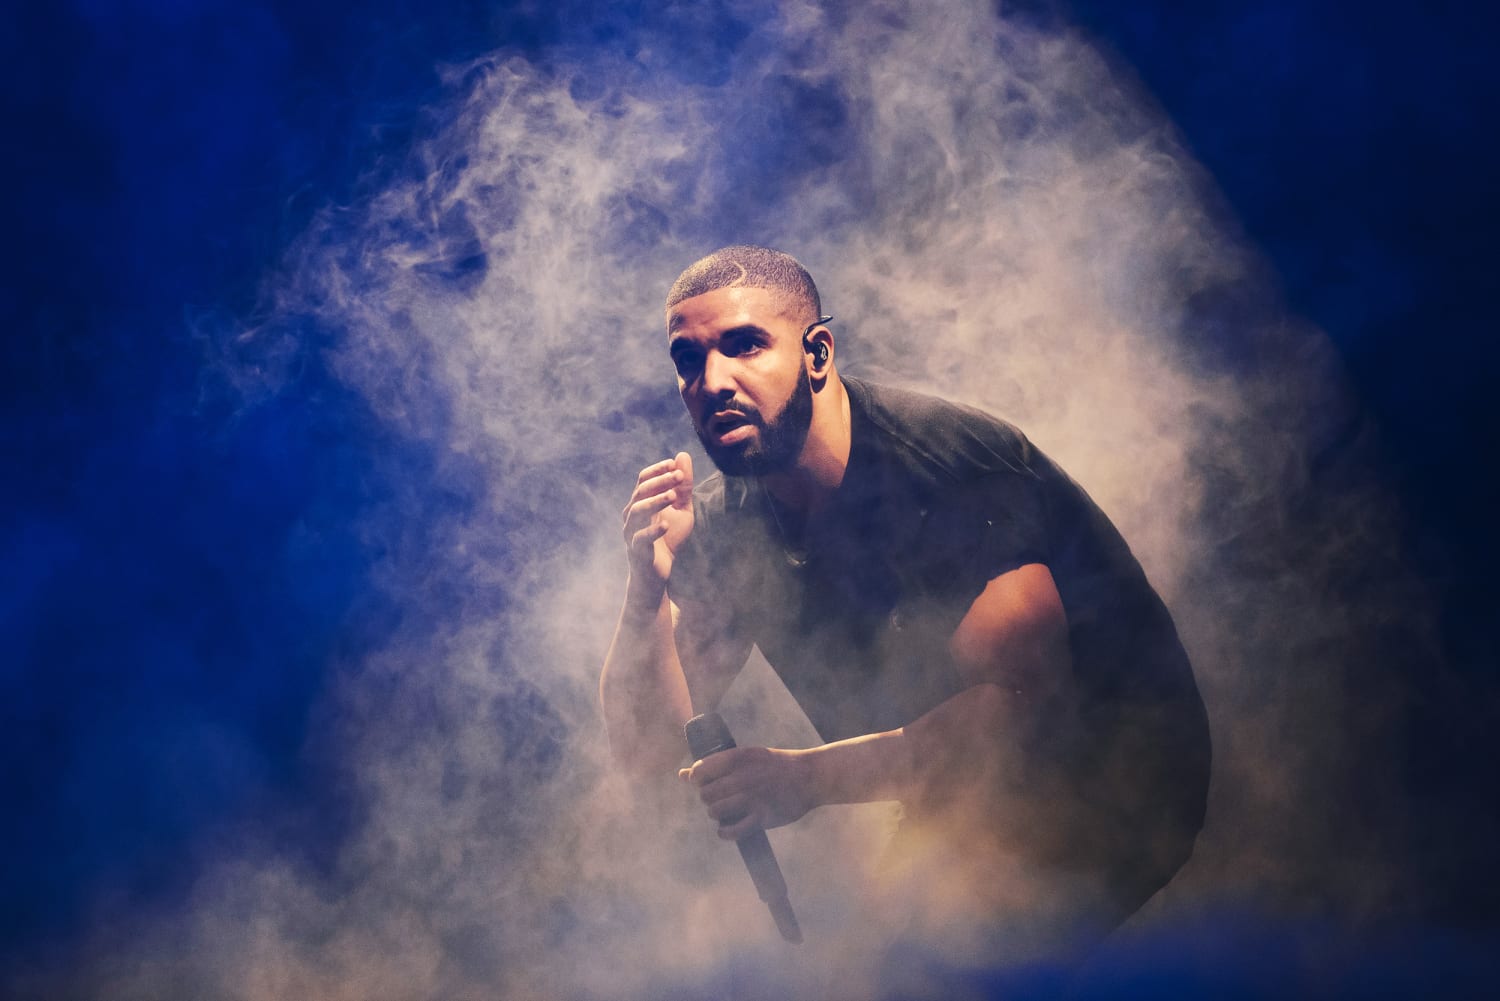 Drake says he’s taking a break from music due to stomach issues he’s suffered from for years